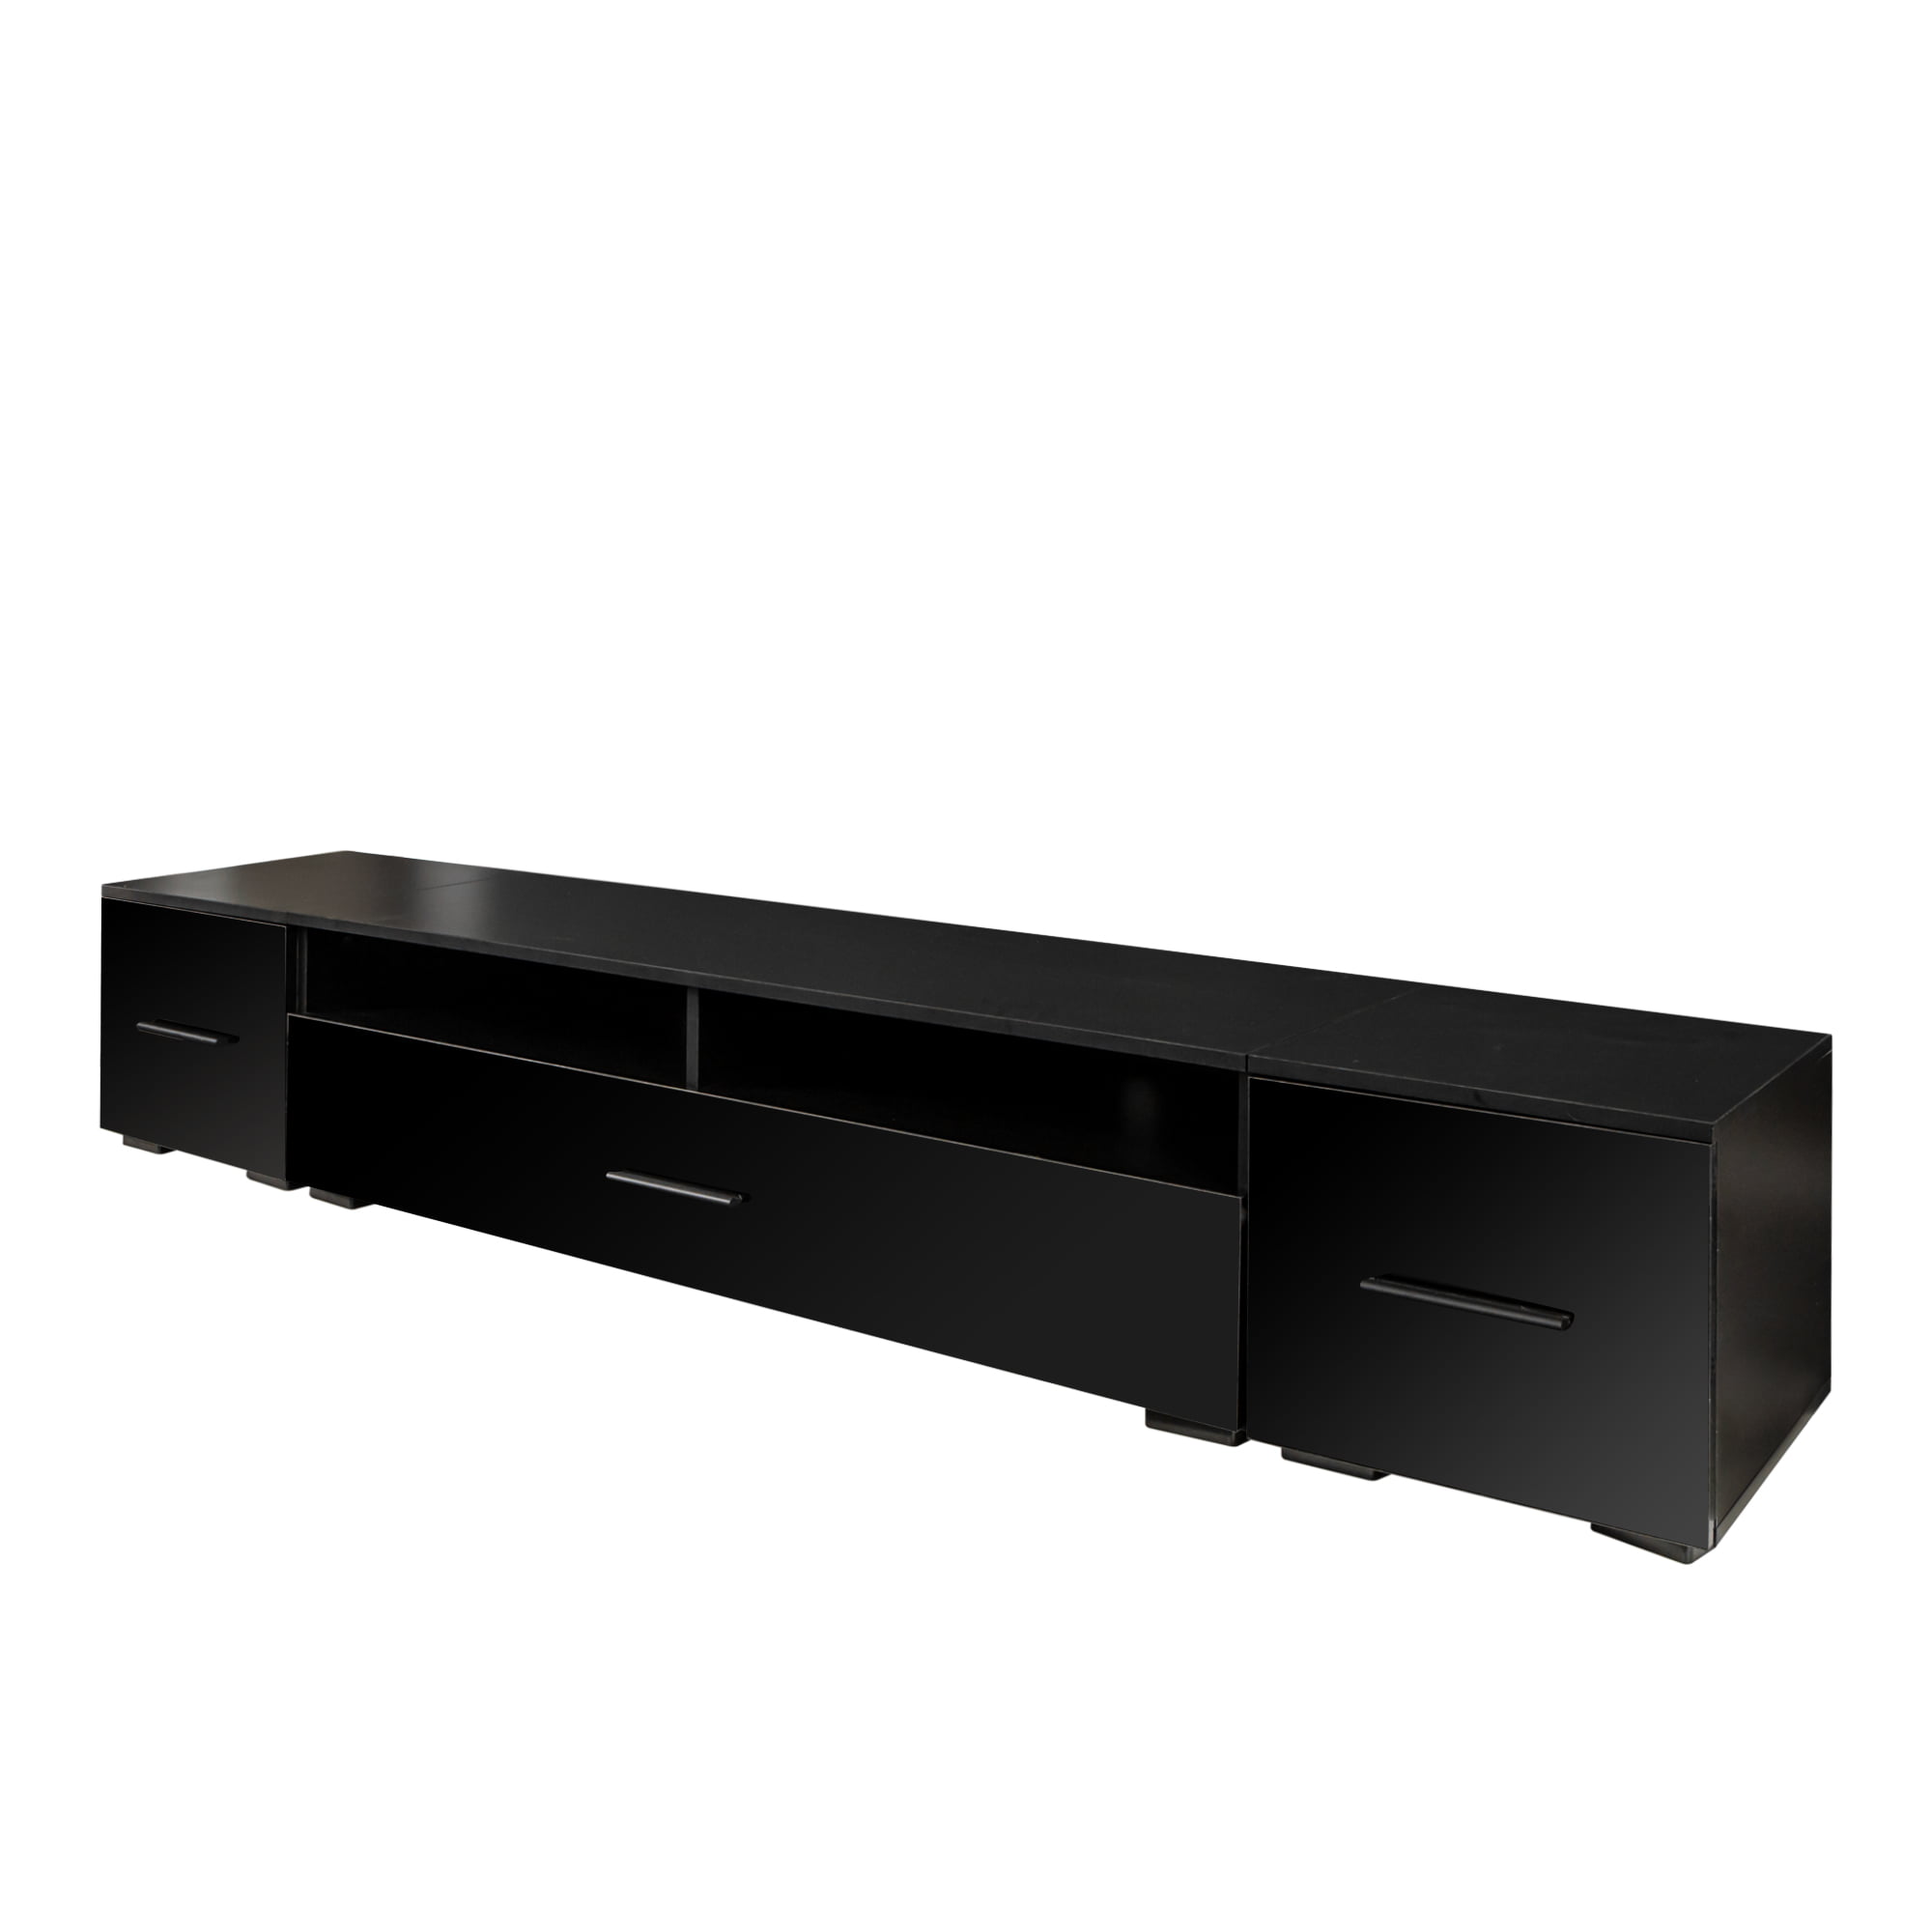 Minimalist Design TV Stand With Color Changing LED Lights - WF295802AAB